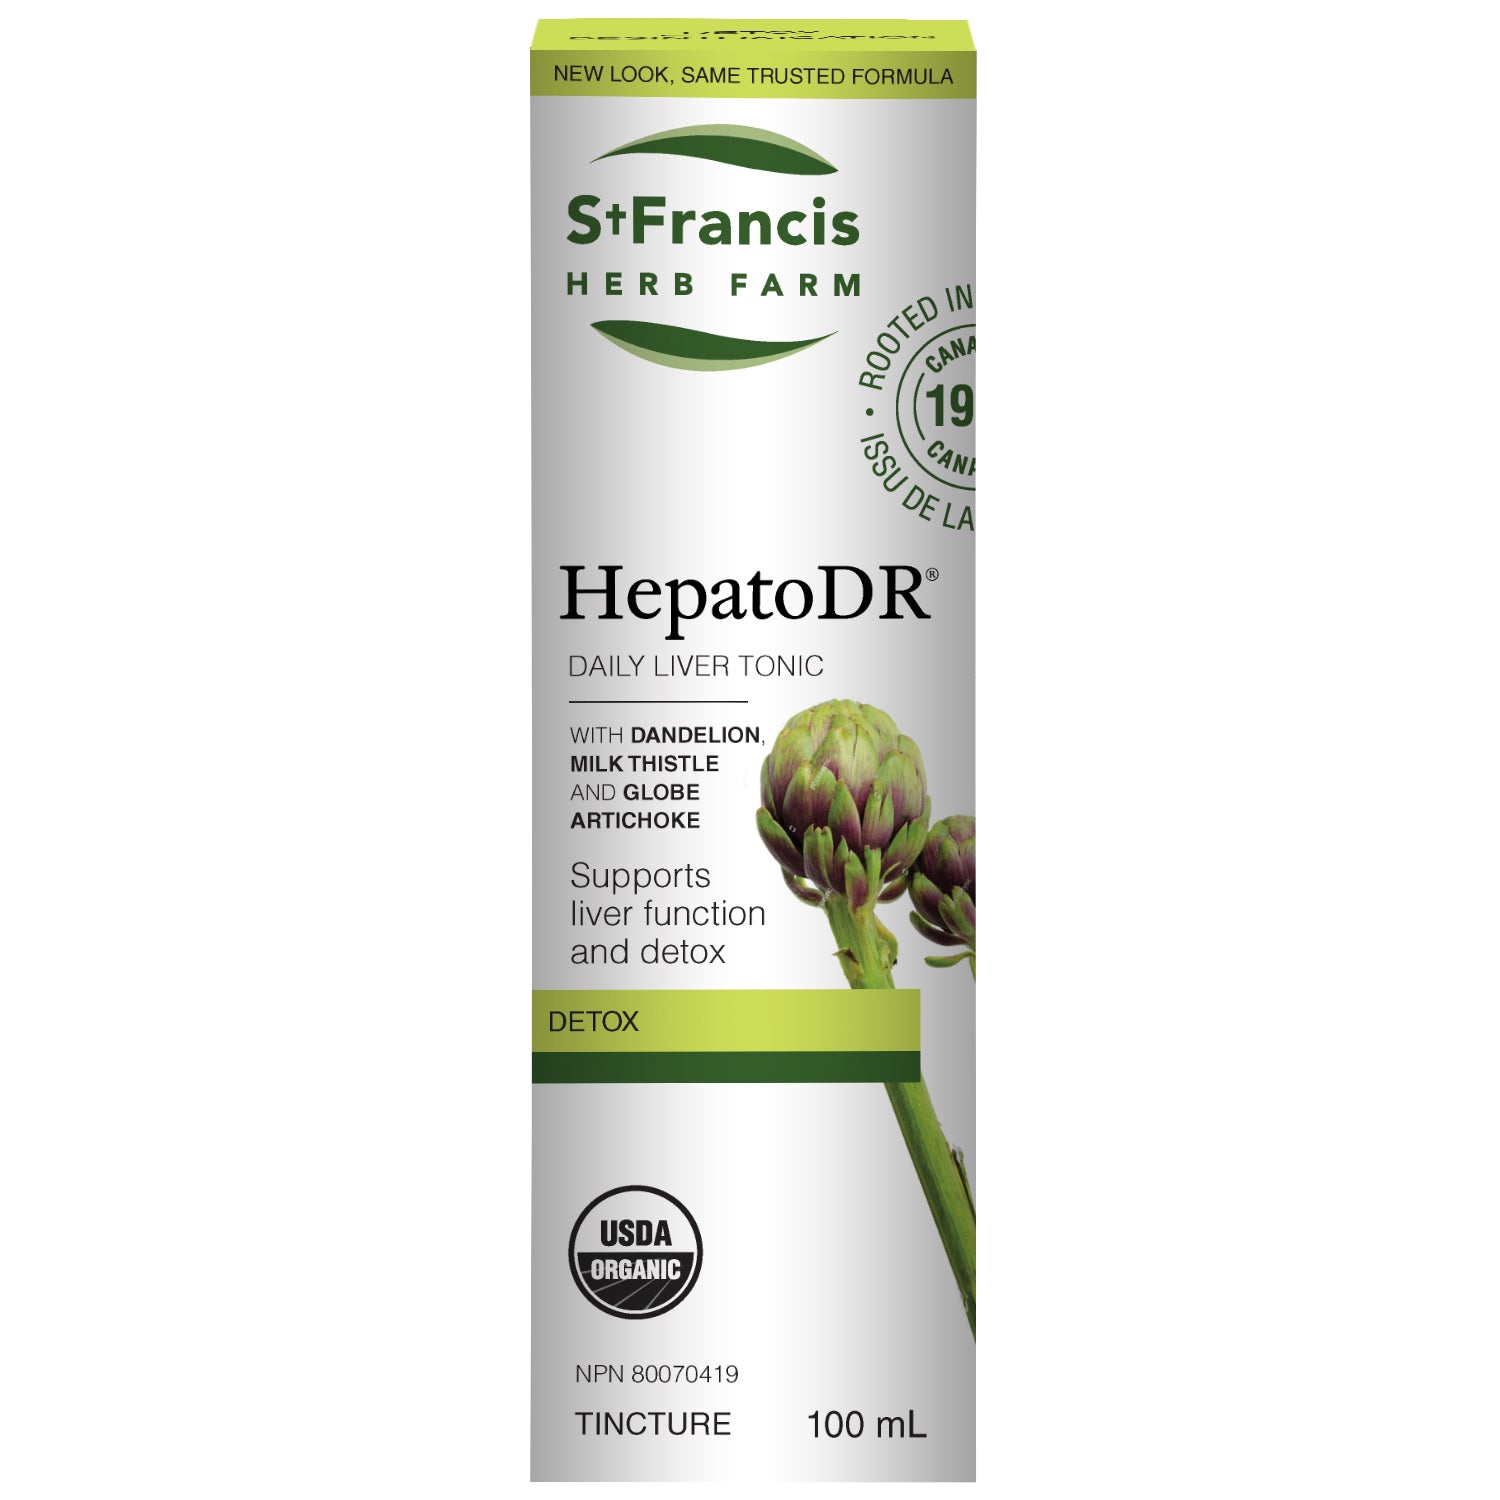 St. Francis Hepato DR 100ml